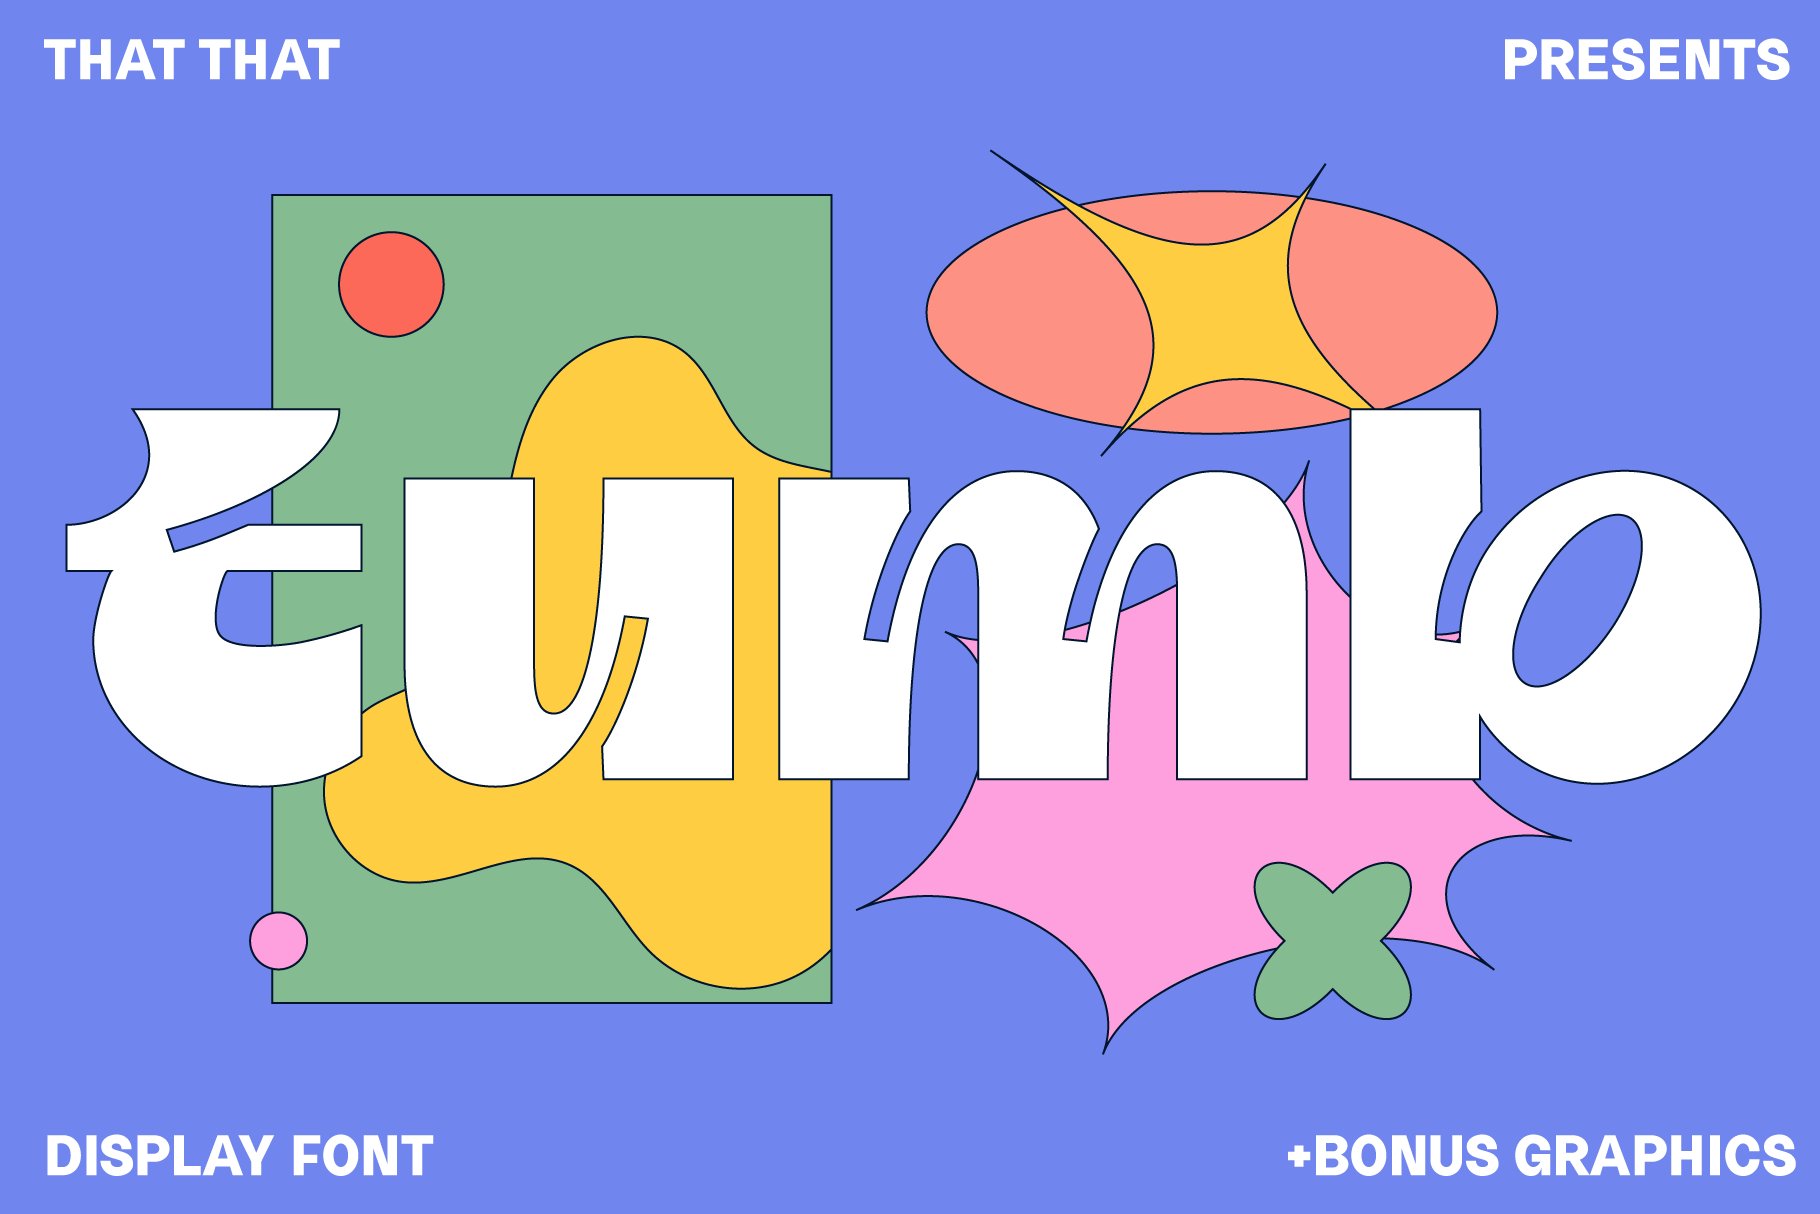 Tumb Quirky Display Font cover image.